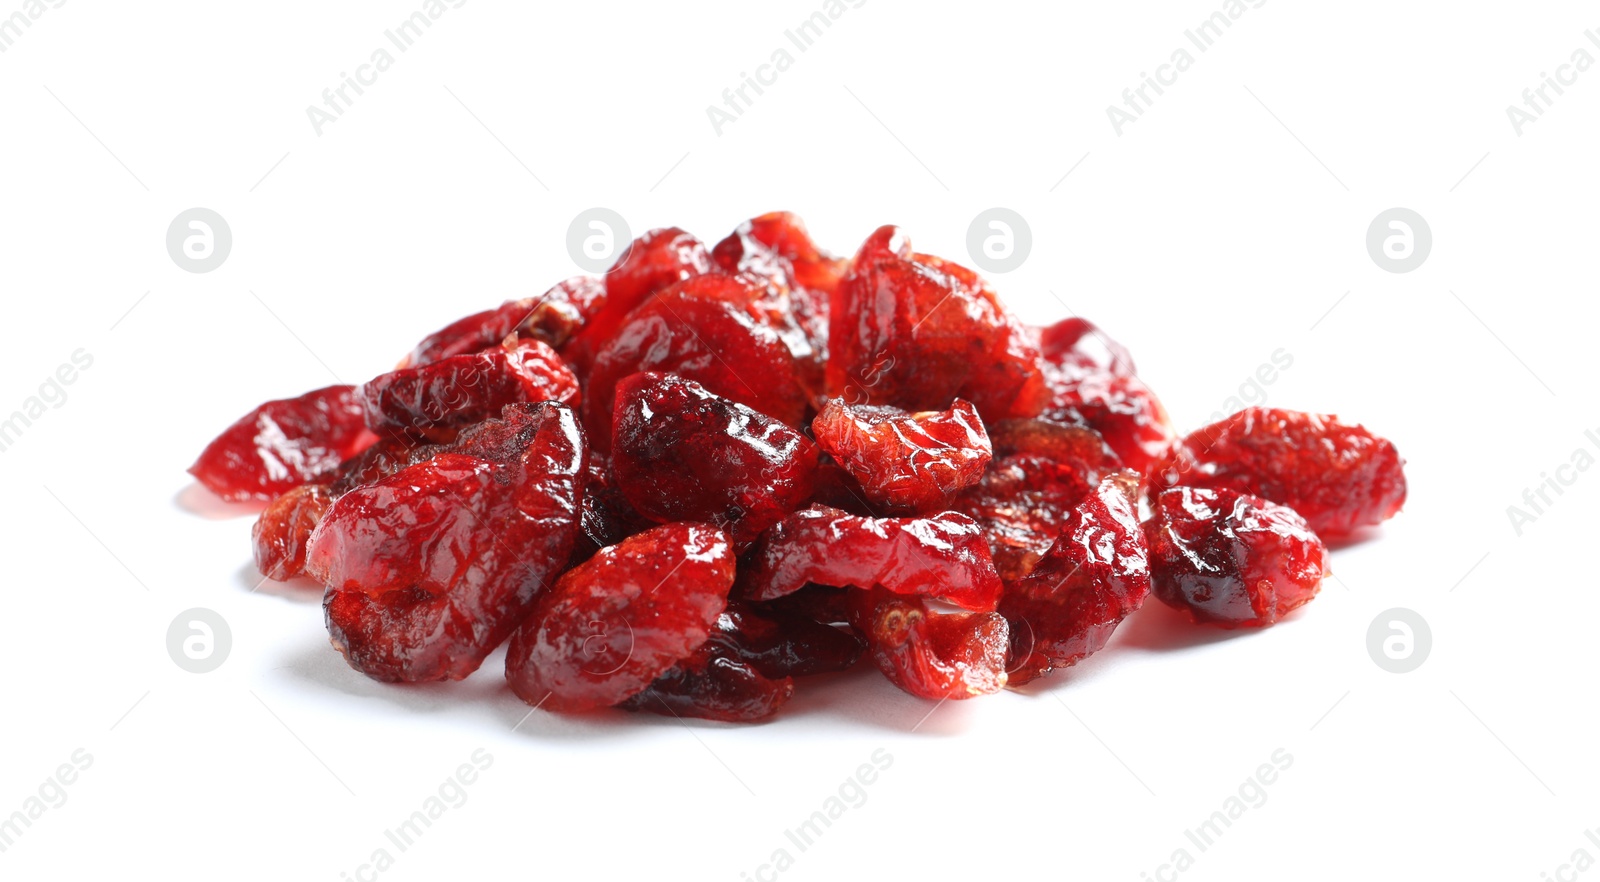 Photo of Heap of cranberries on white background. Dried fruit as healthy snack